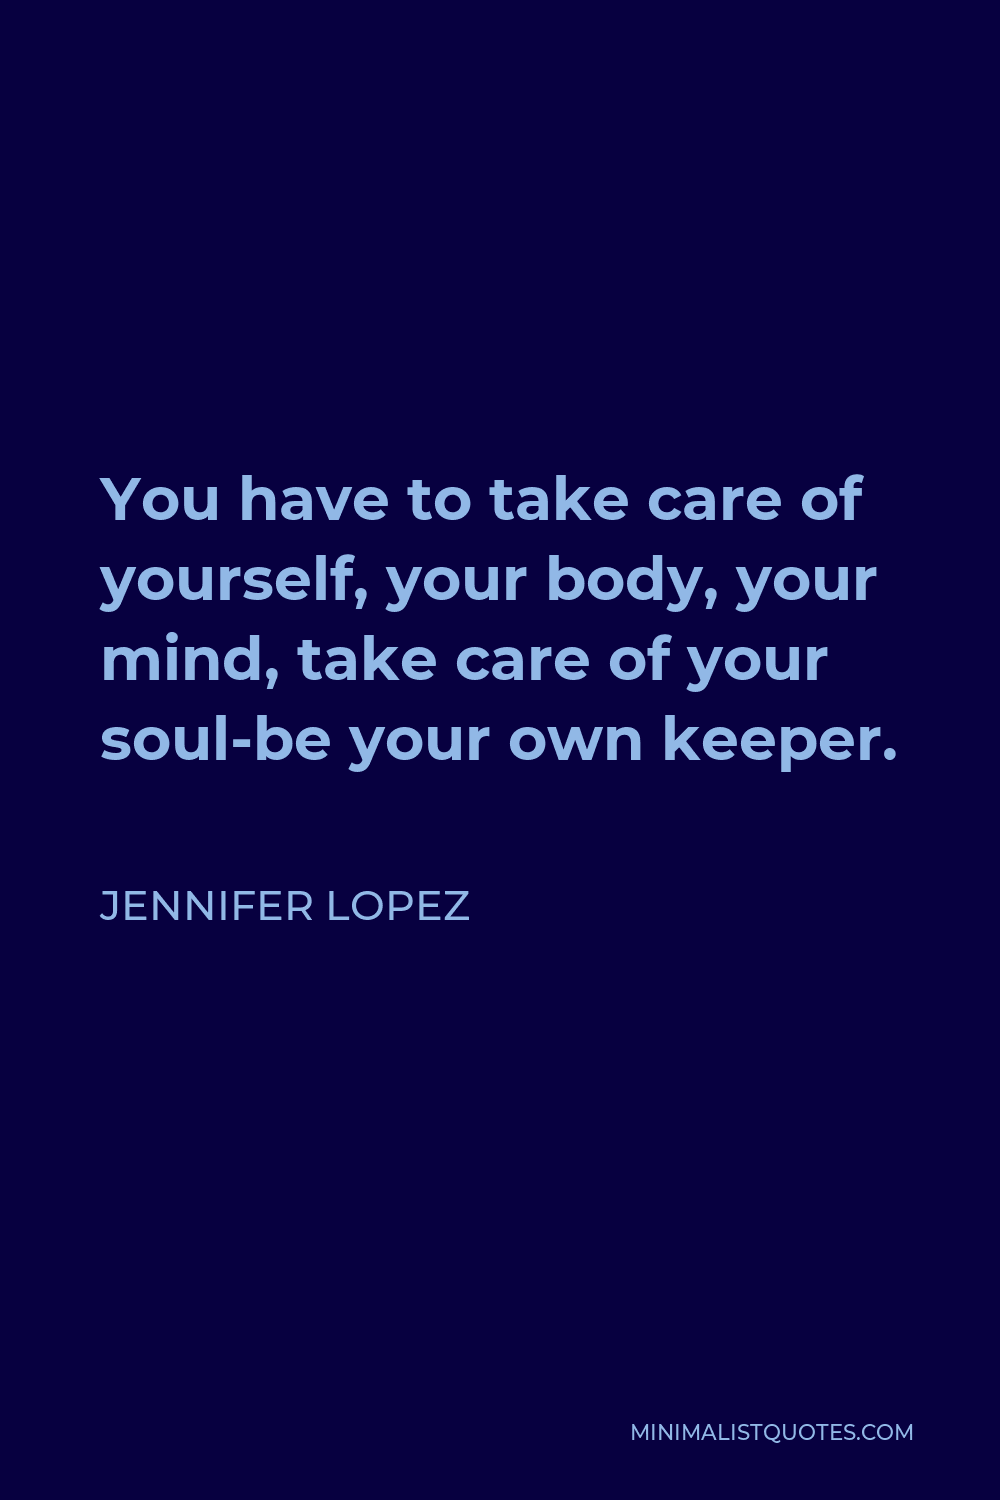 Jennifer Lopez Quote - You have to take care of yourself, your body, your mind, take care of your soul-be your own keeper.